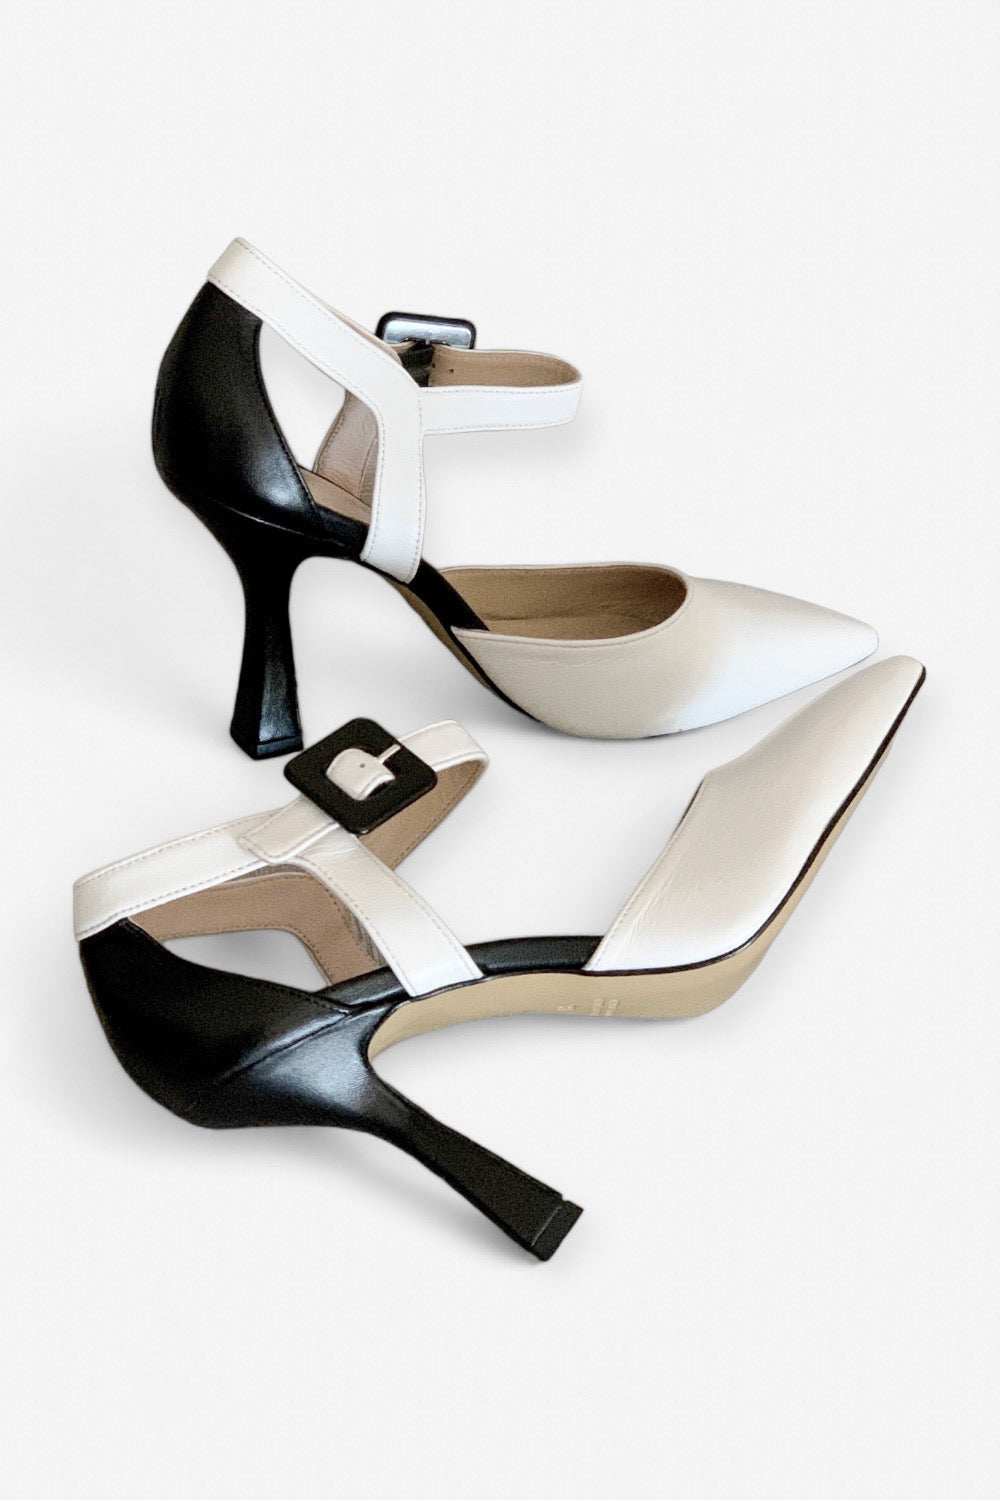 Gatsby Black & White Ankle Strap Pumps by Marco Cinosi Italian Women's Shoes